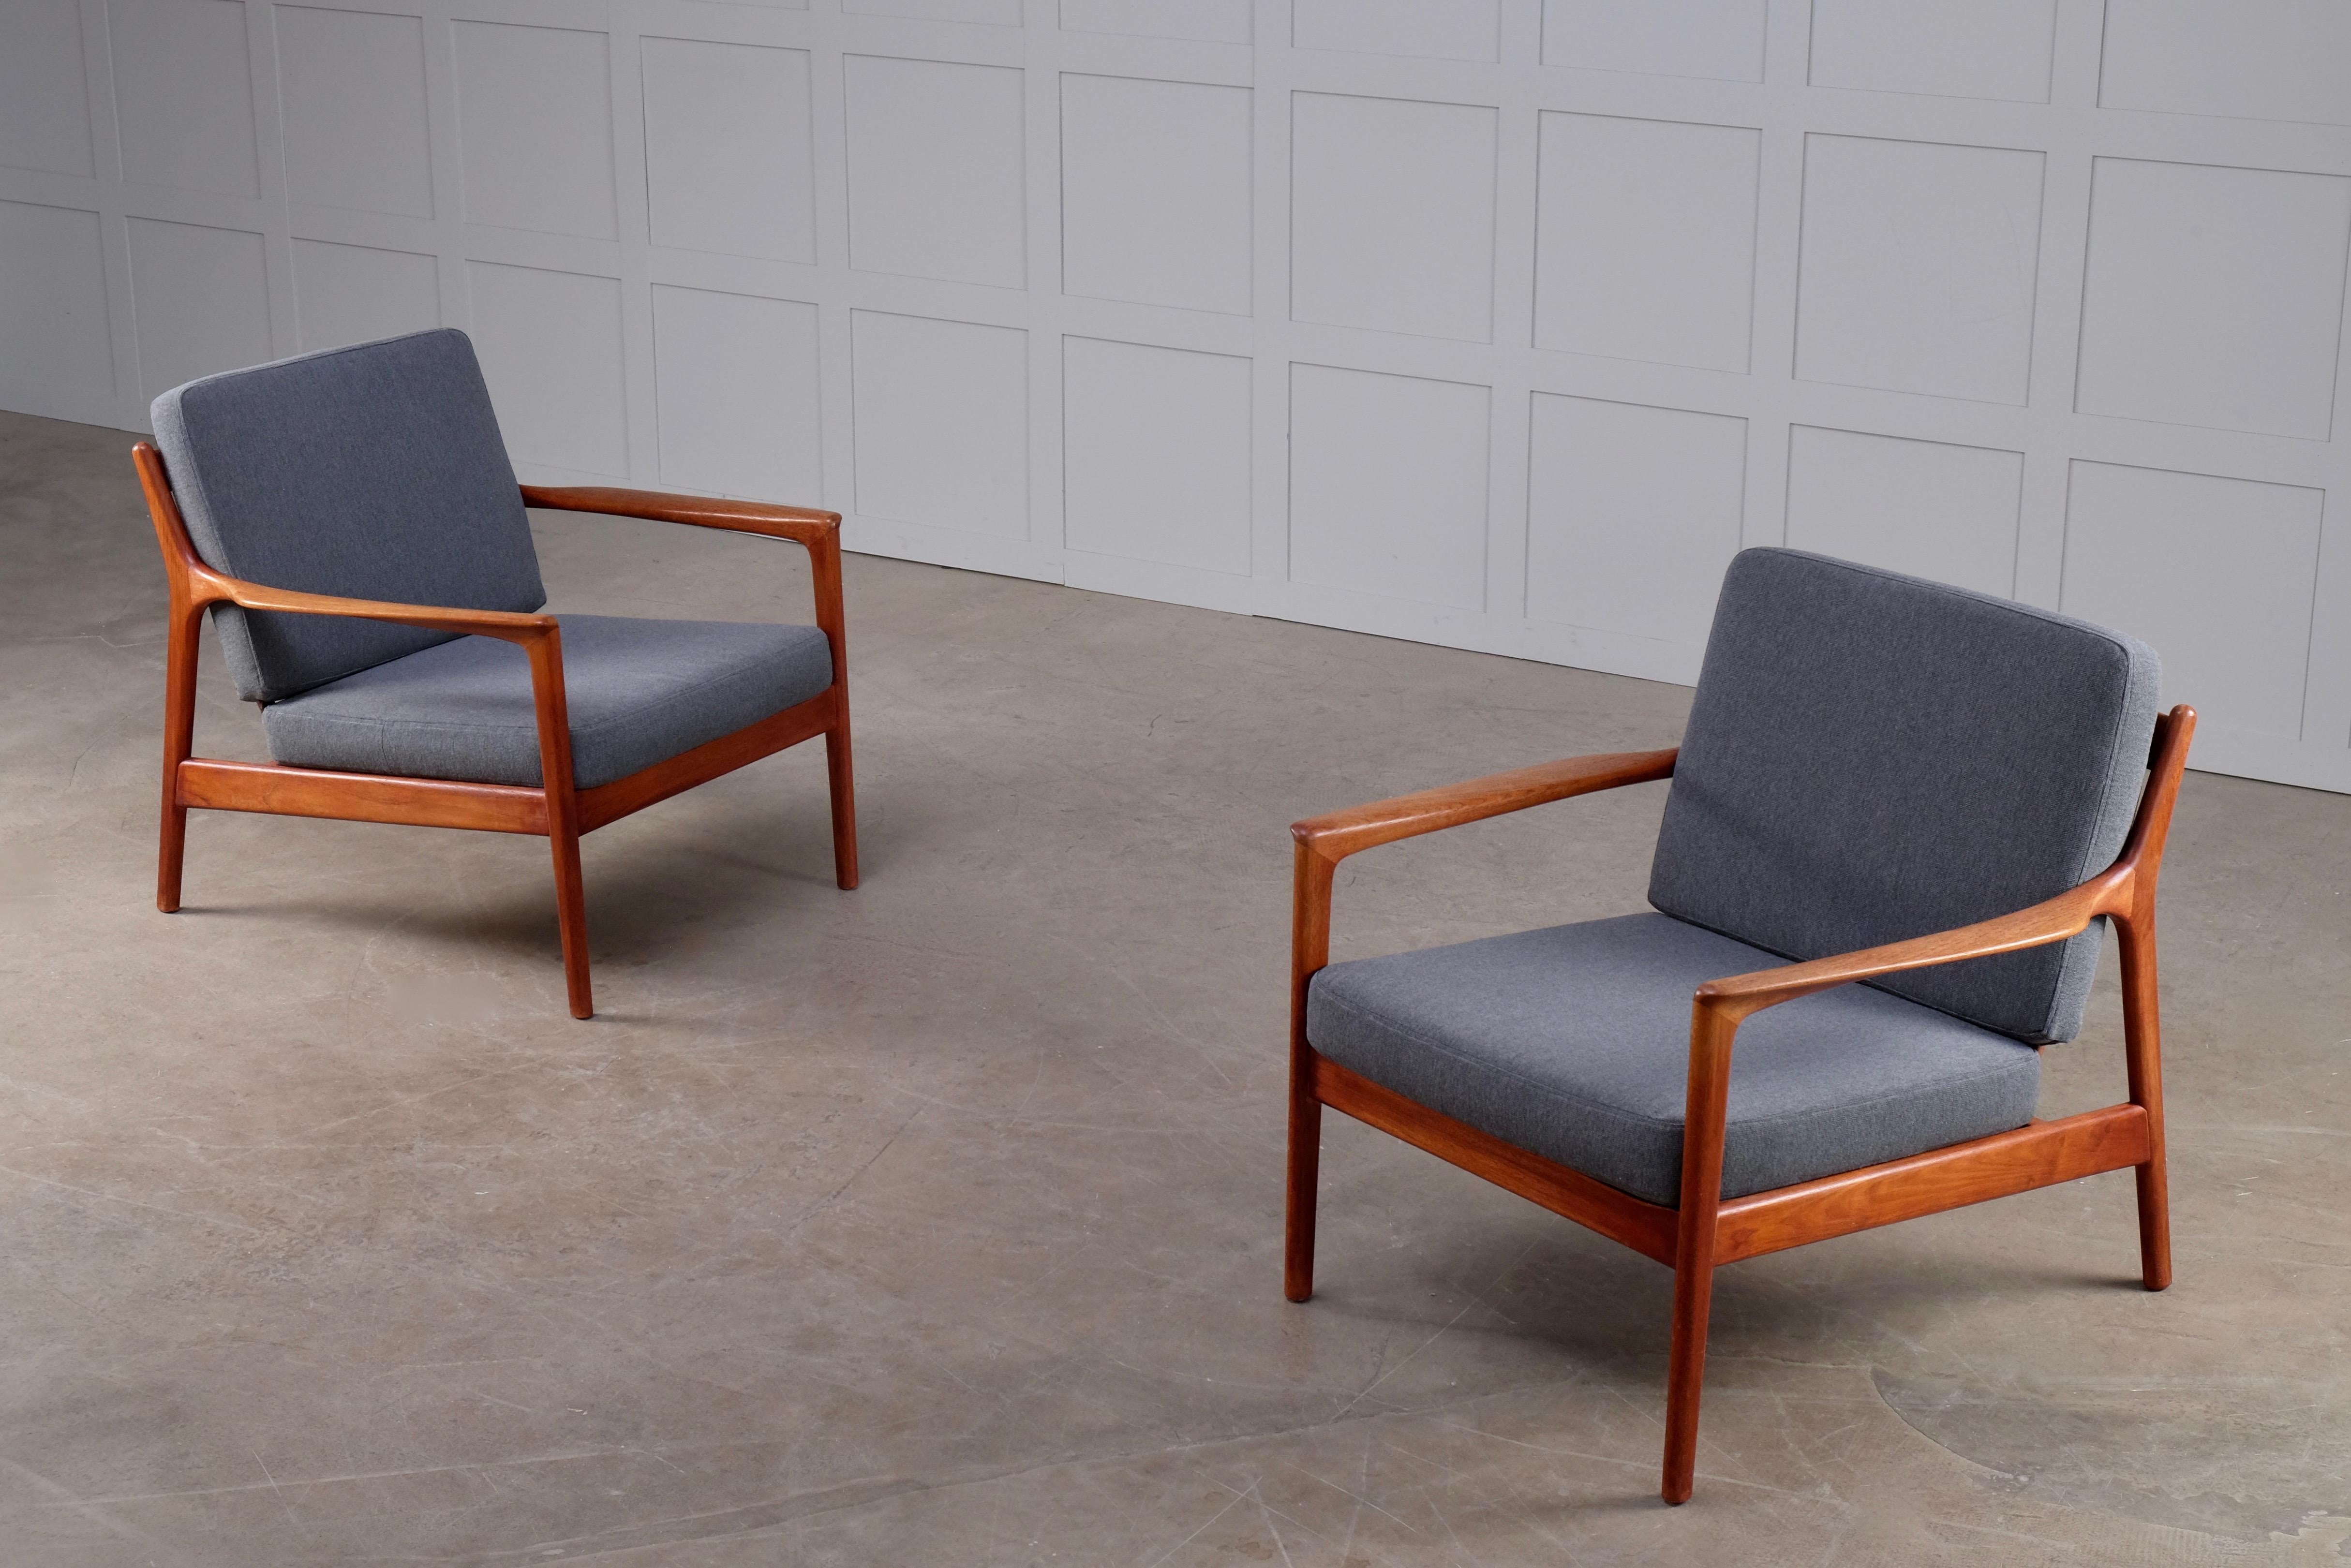 Swedish armchairs in teak by Folke Ohlsson for DUX, Sweden, 1960s.
Excellent vintage condition with signs of usage and patina. 


   